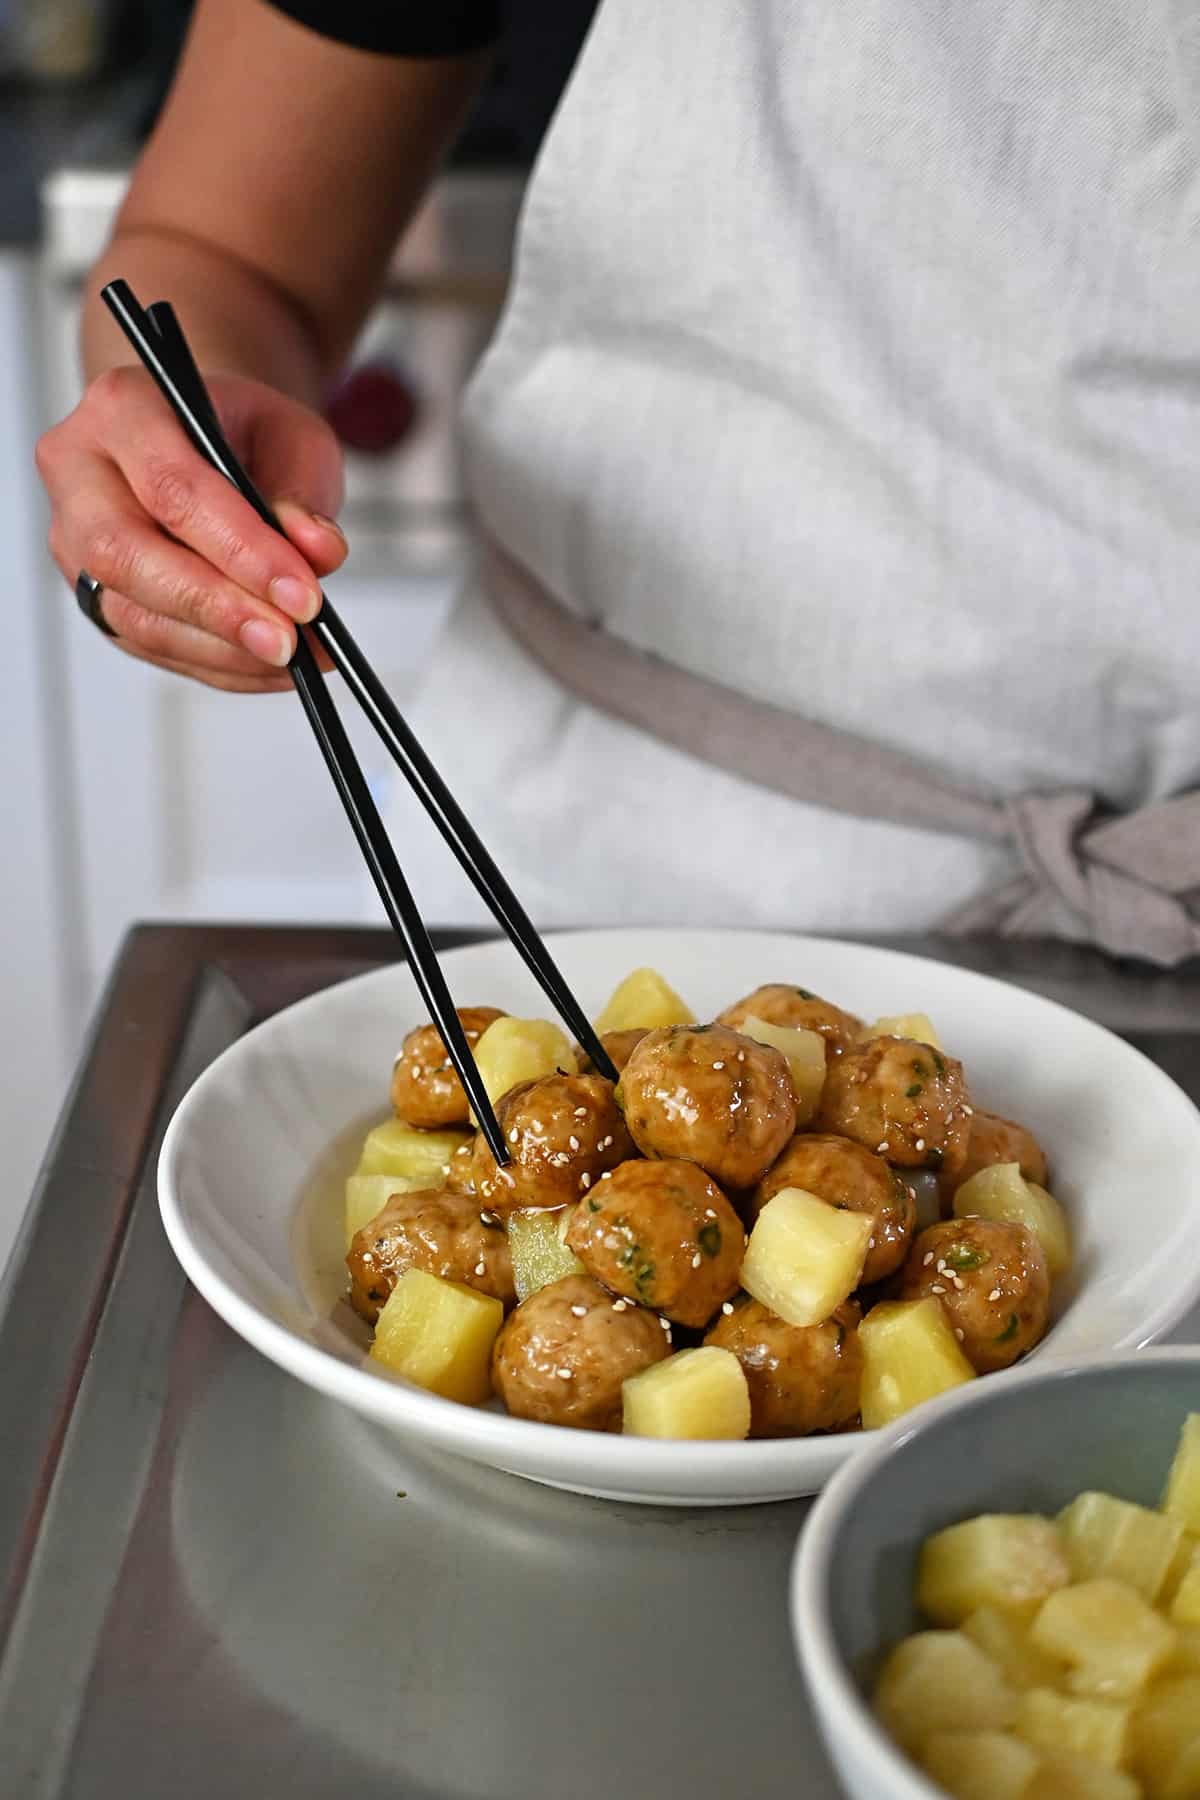 A pair of chopsticks is grabbing a teriyaki pineapple meatball from a bowl with cubed pineapple.